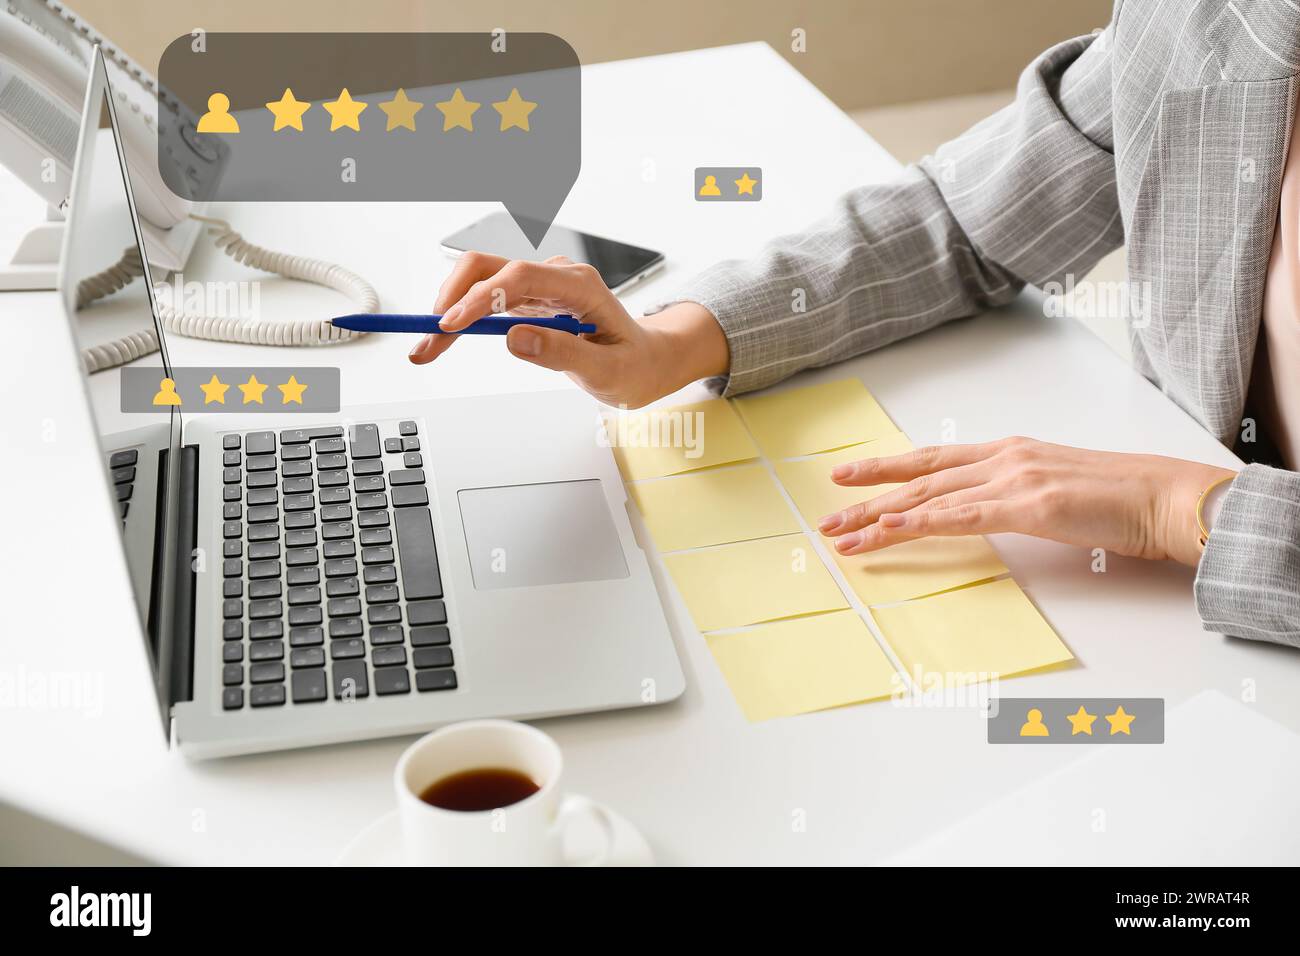 Woman with laptop giving rating to new website in office Stock Photo